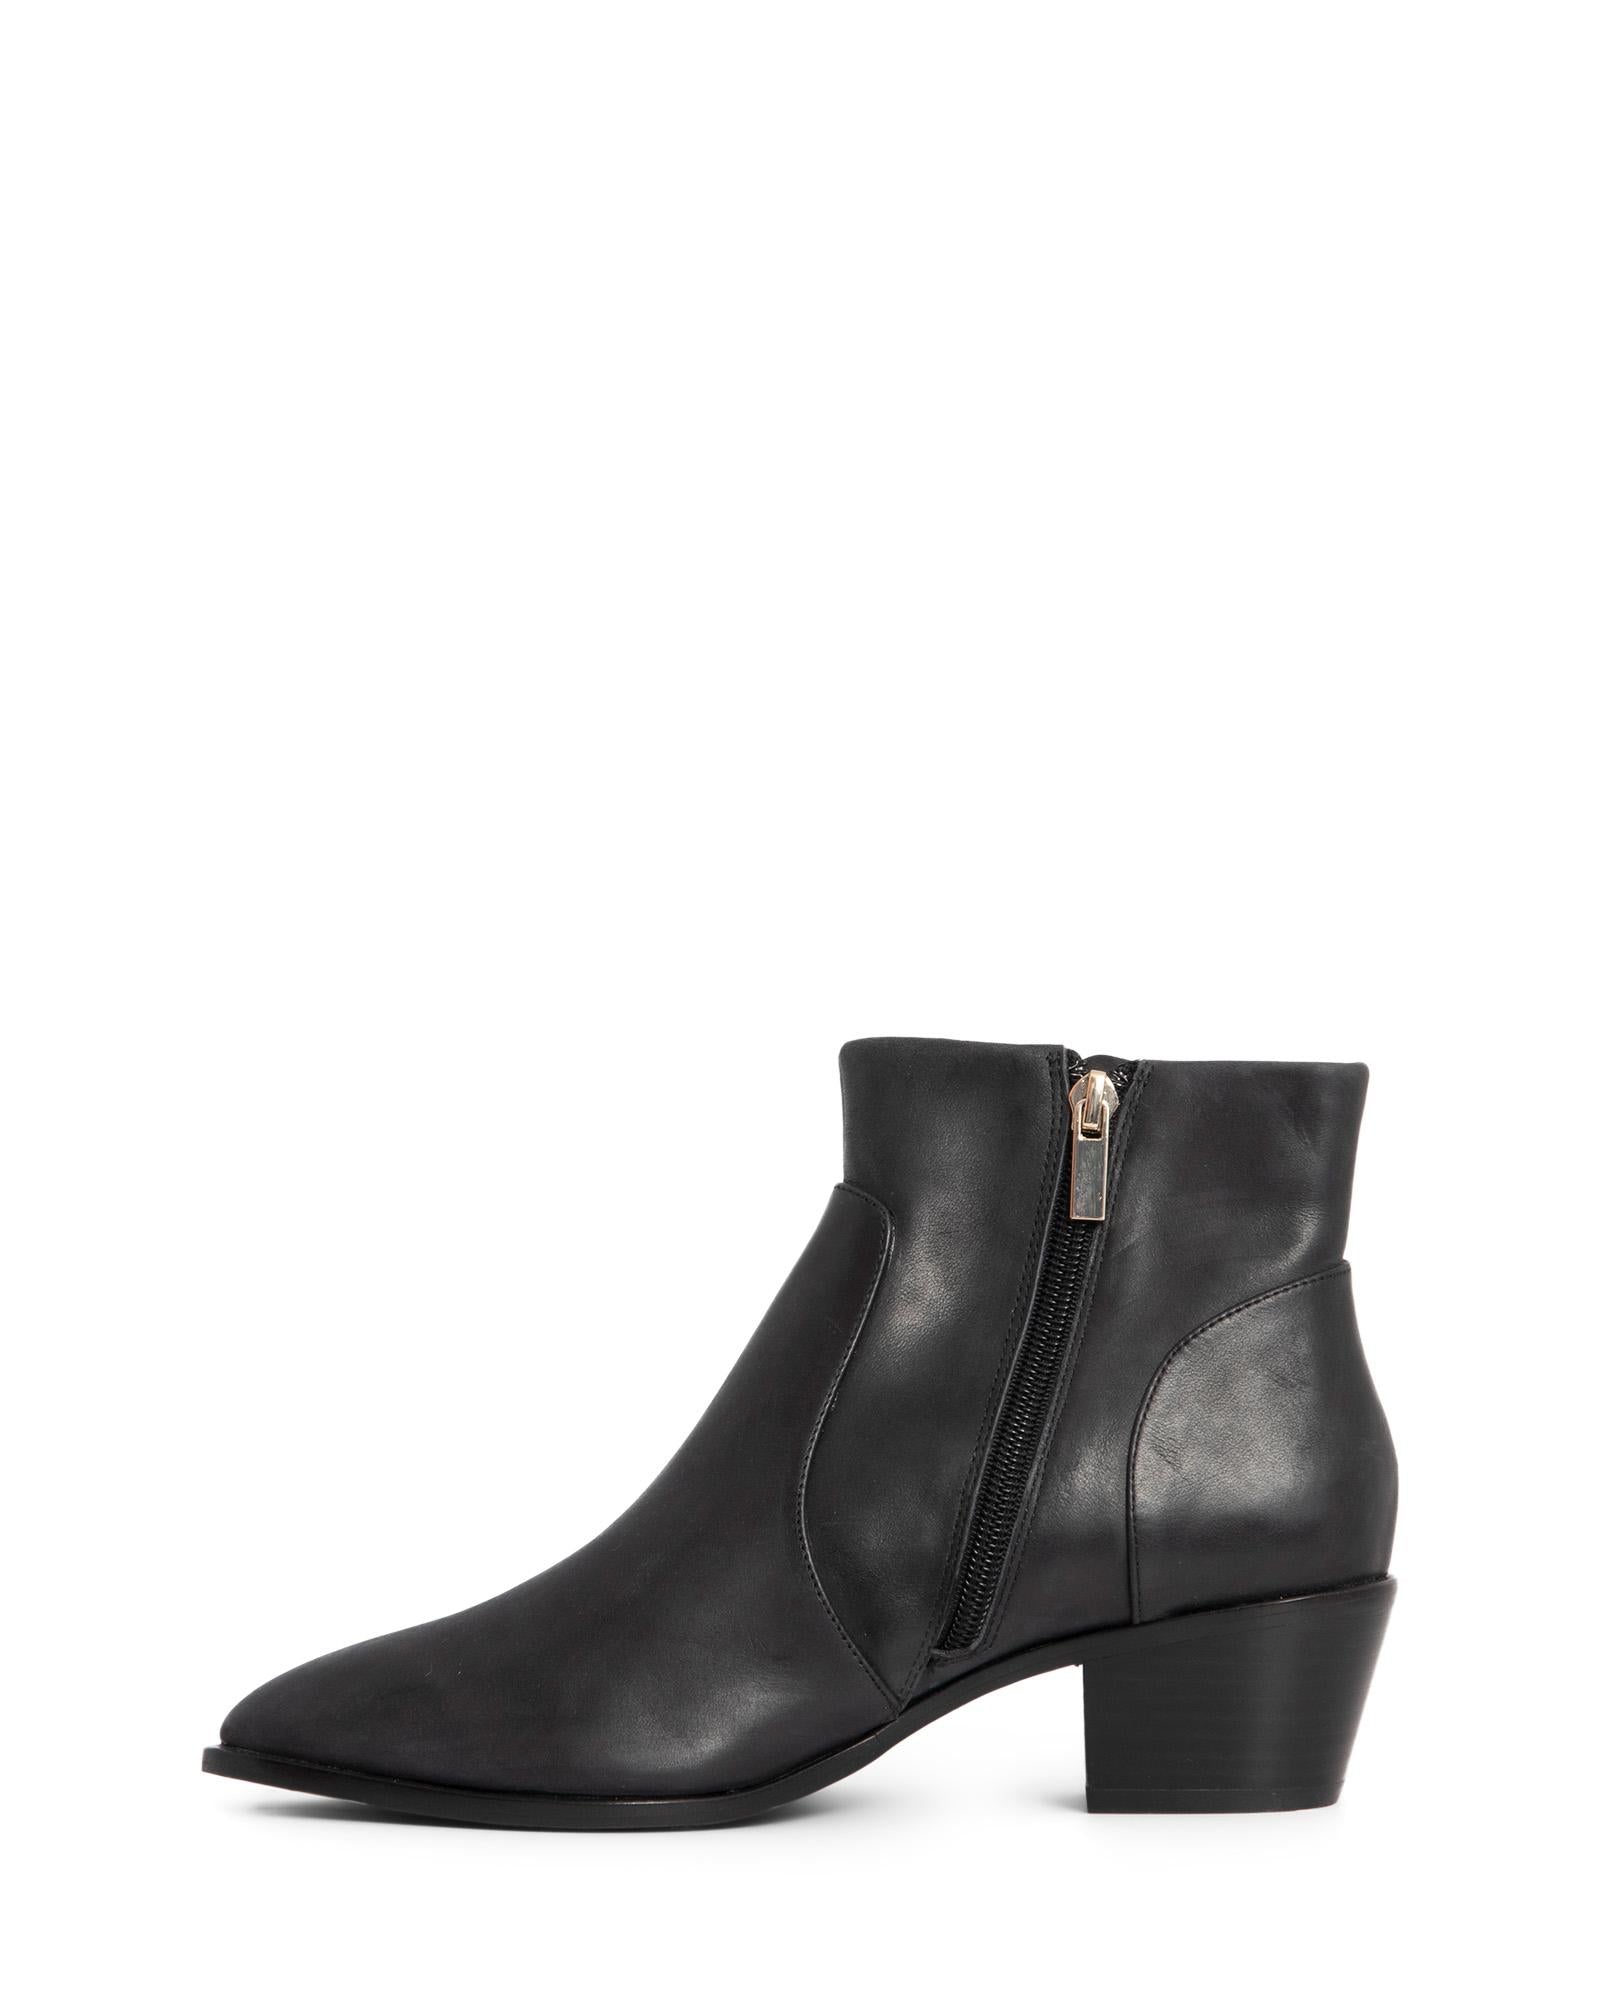 Willow Black 5cm Ankle Boot